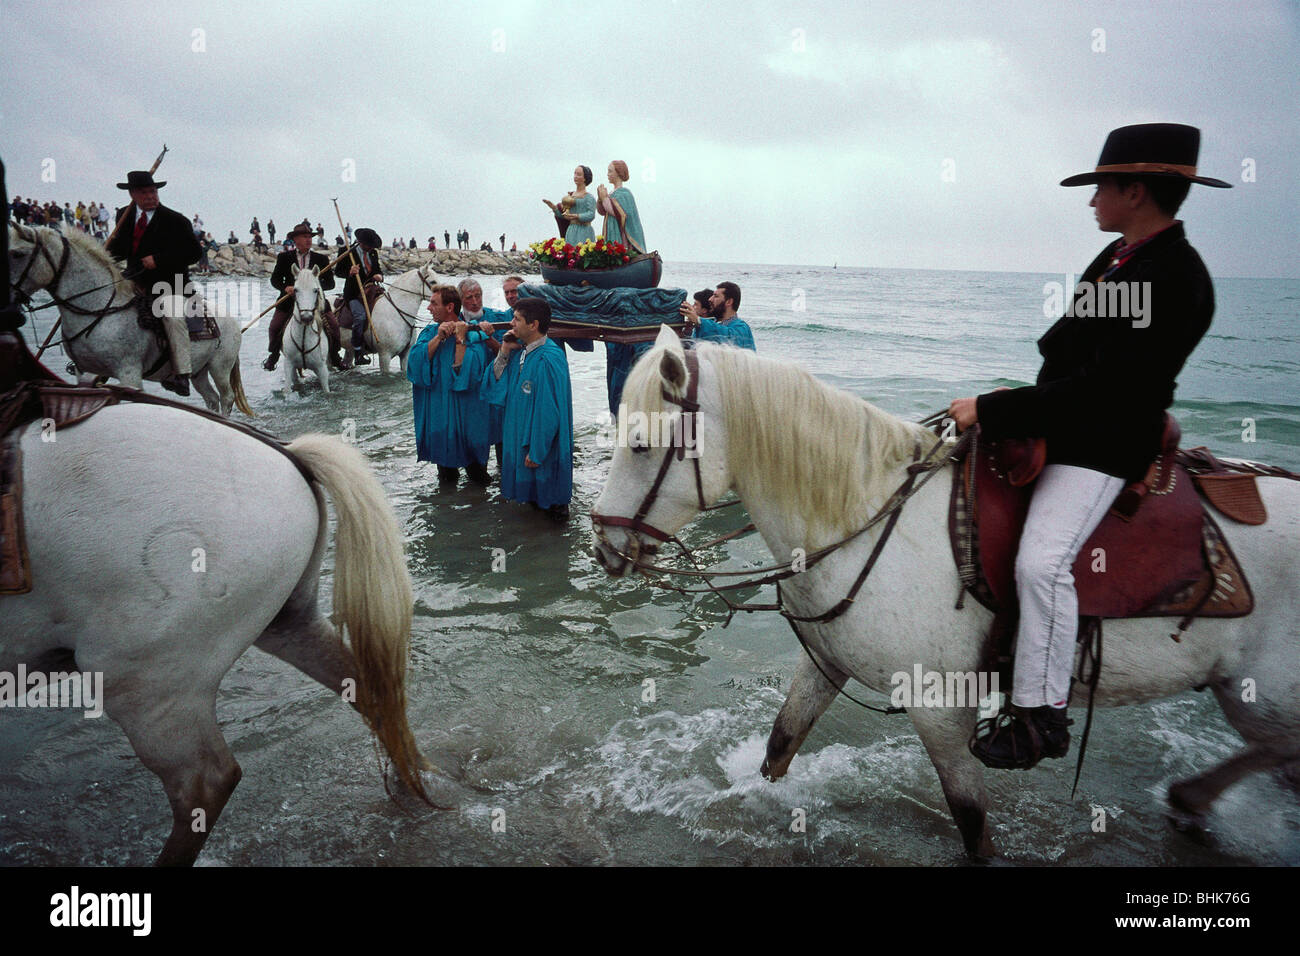 Saintes Maries de la Mer. Camargue. France. Local cowboys or Gardians lead the procession of the annual Gypsy Pilgrimage. Stock Photo